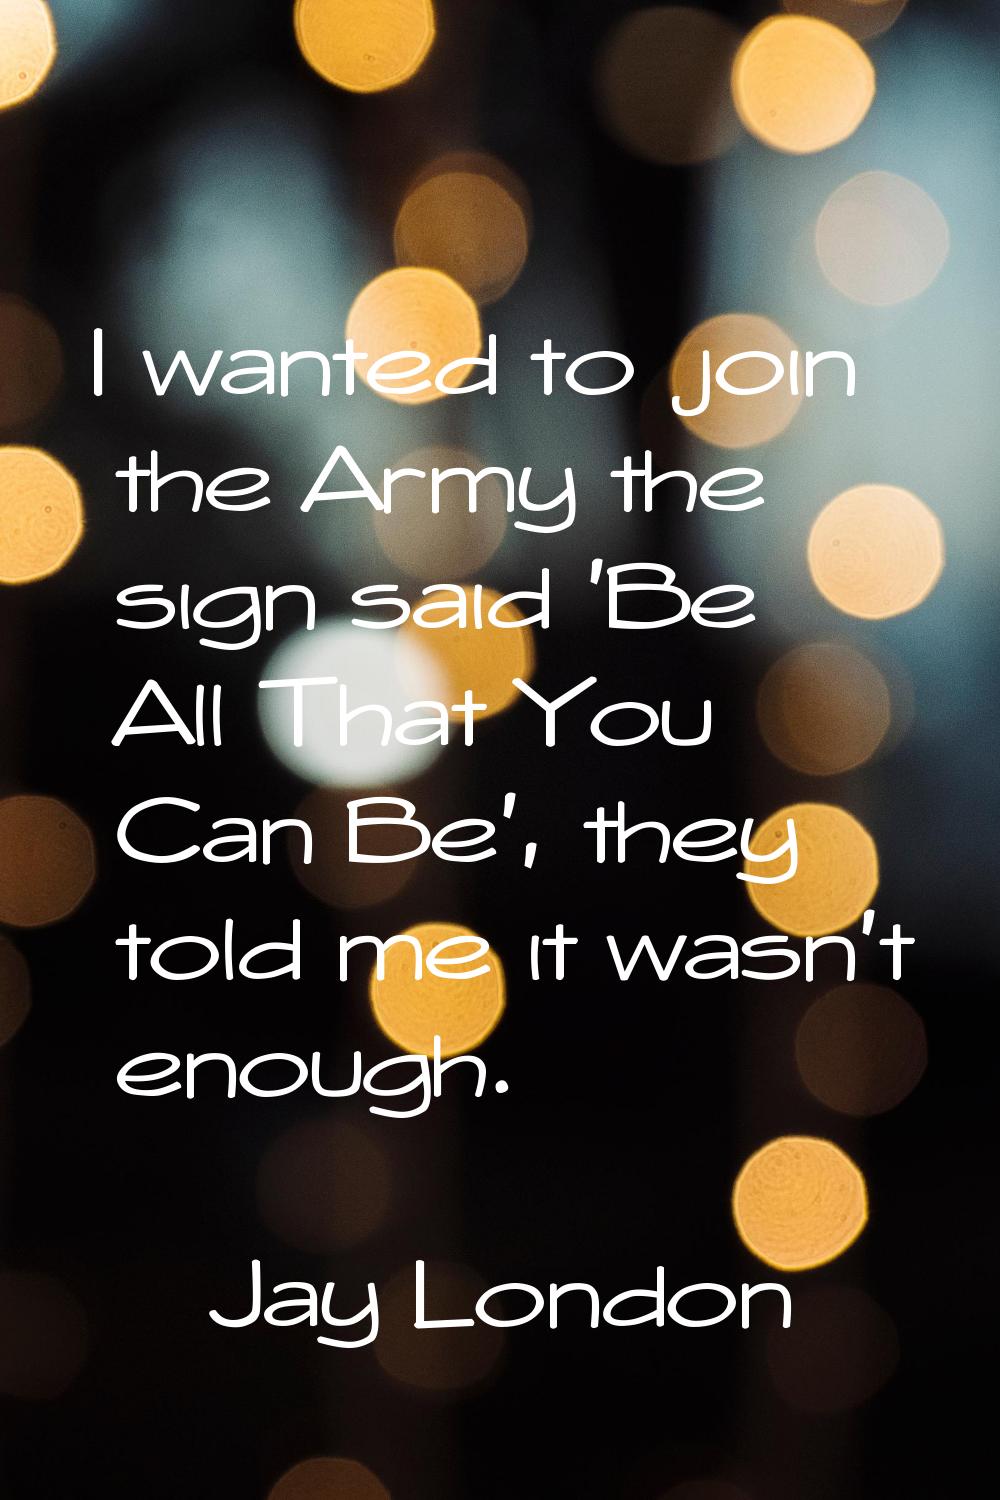 I wanted to join the Army the sign said 'Be All That You Can Be', they told me it wasn't enough.